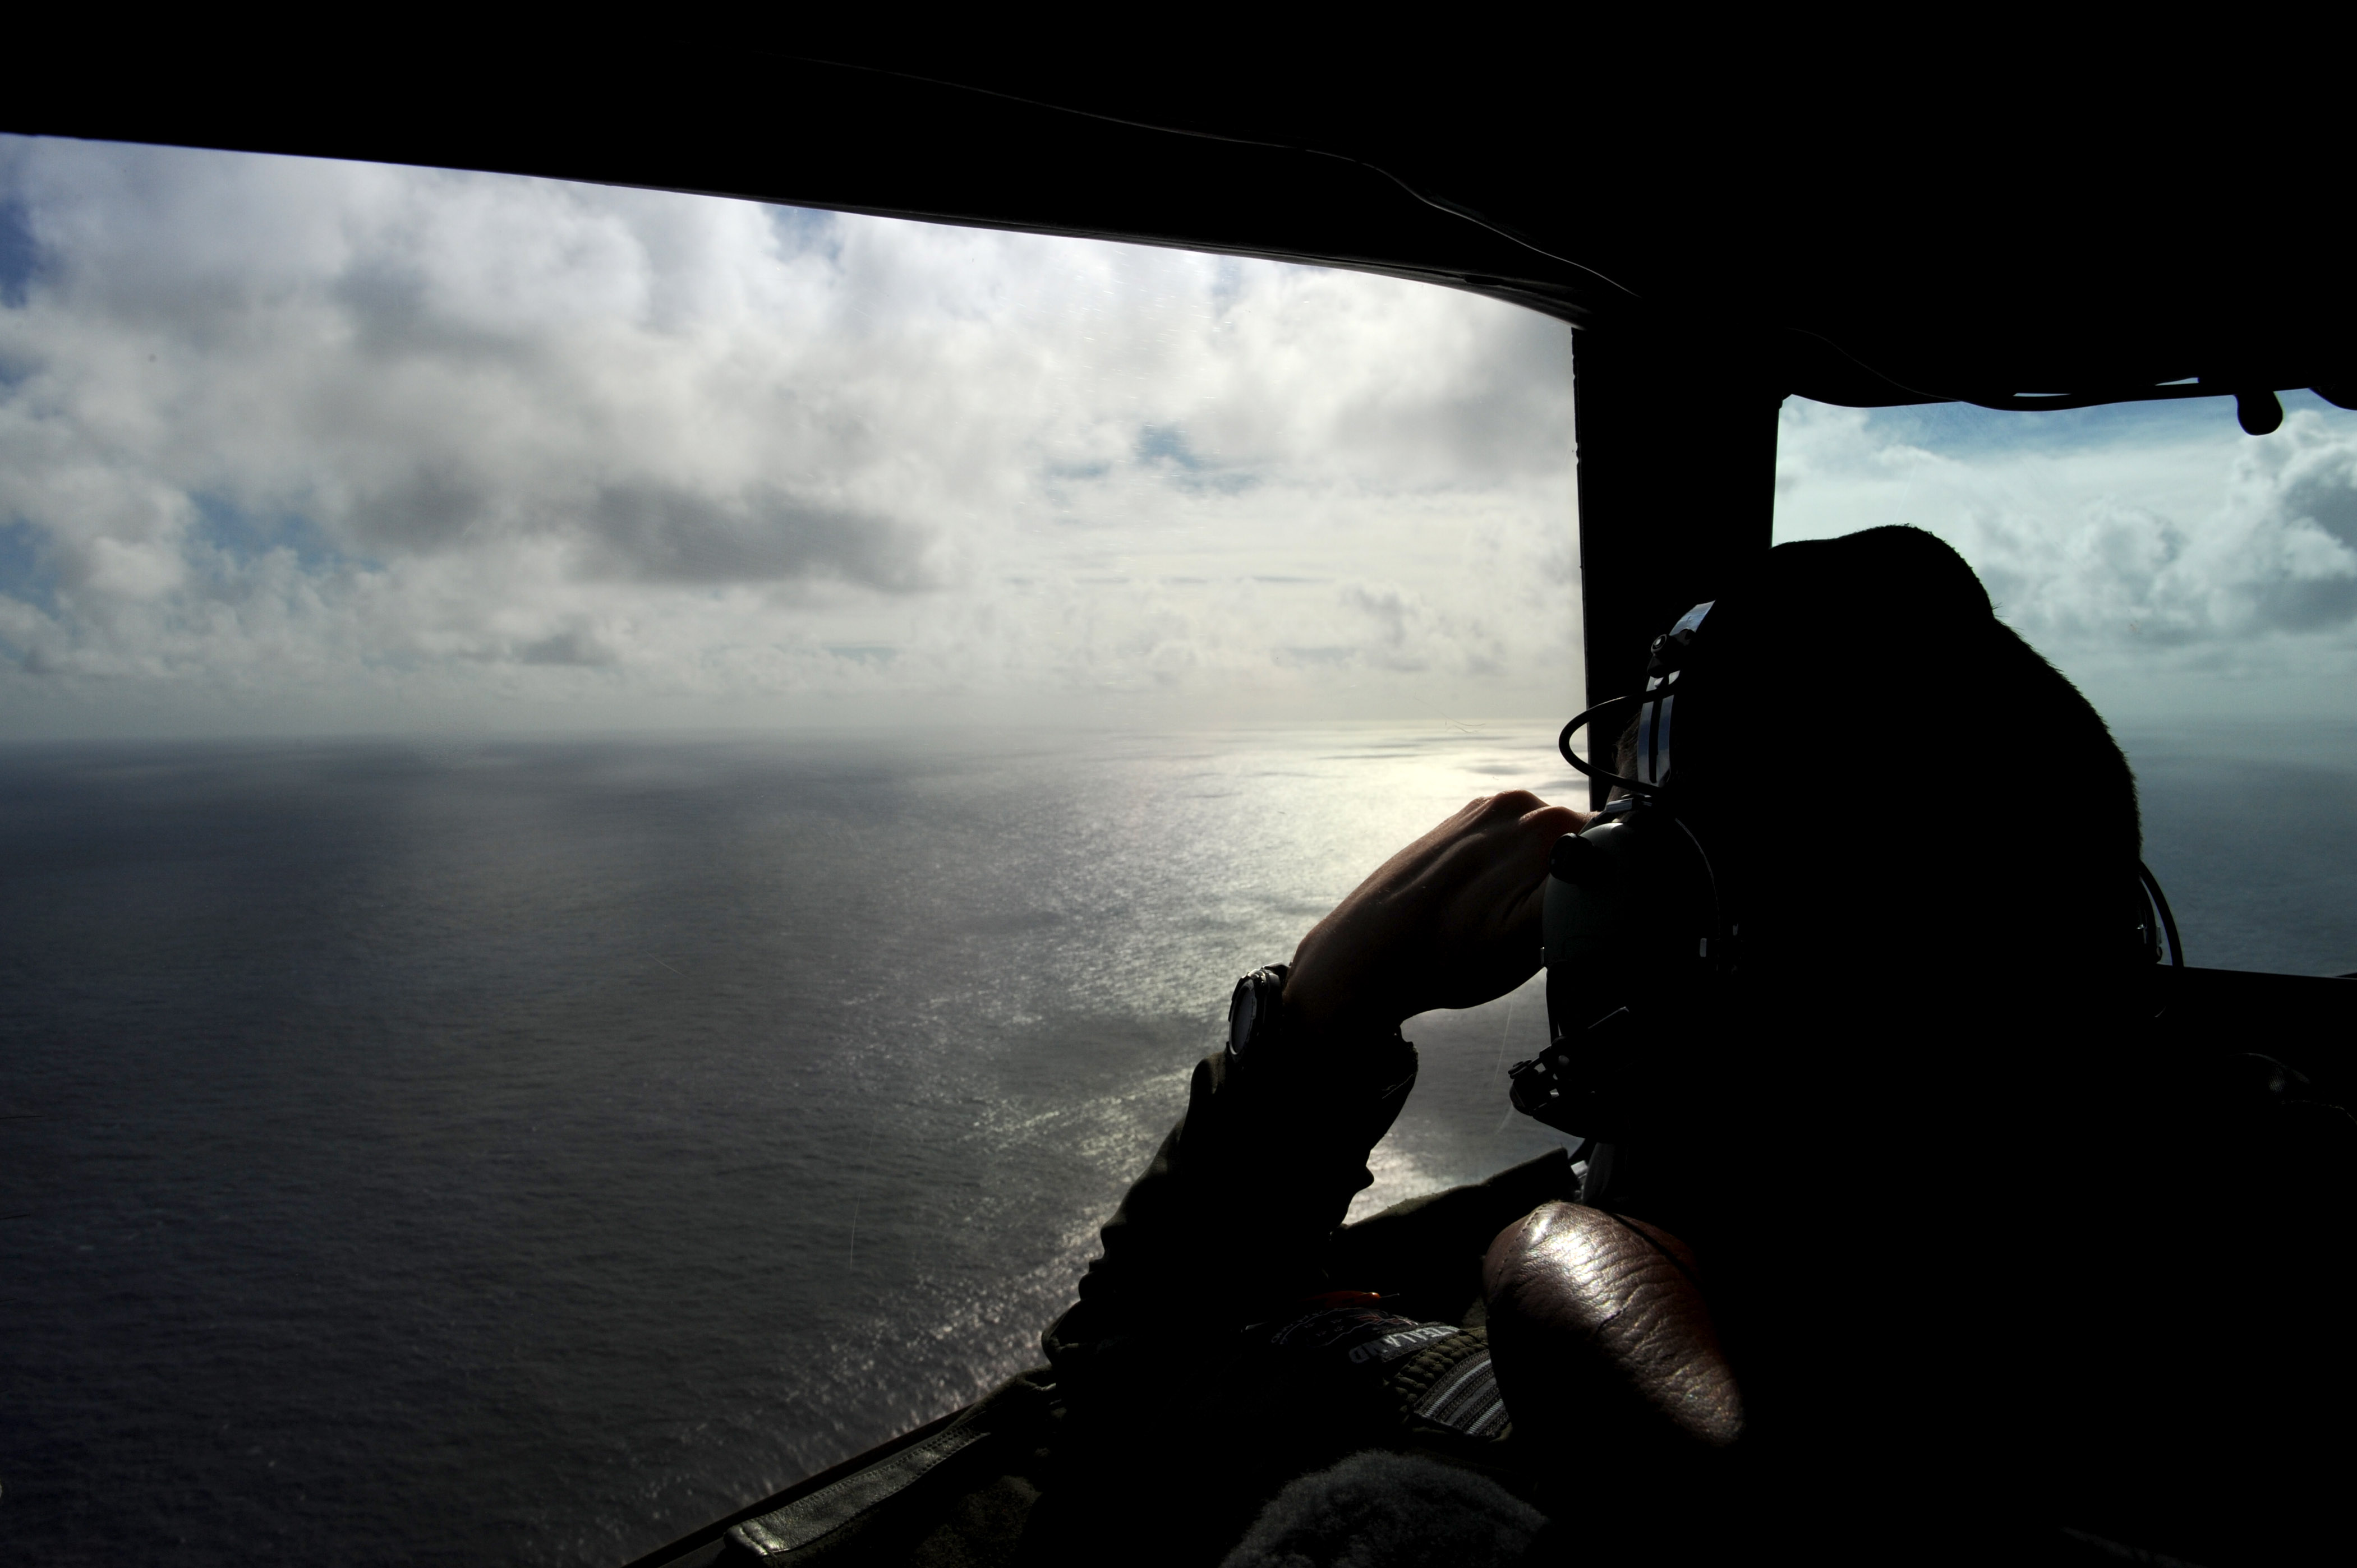 Flight Lieutenant Timothy McAlevey of the Royal New Zealand Airforce helps look for objects during the search for missing Malaysia Airlines Flight MH 370 off the coast of Perth, Australia on April 13, 2014. (Pool—Getty Images)